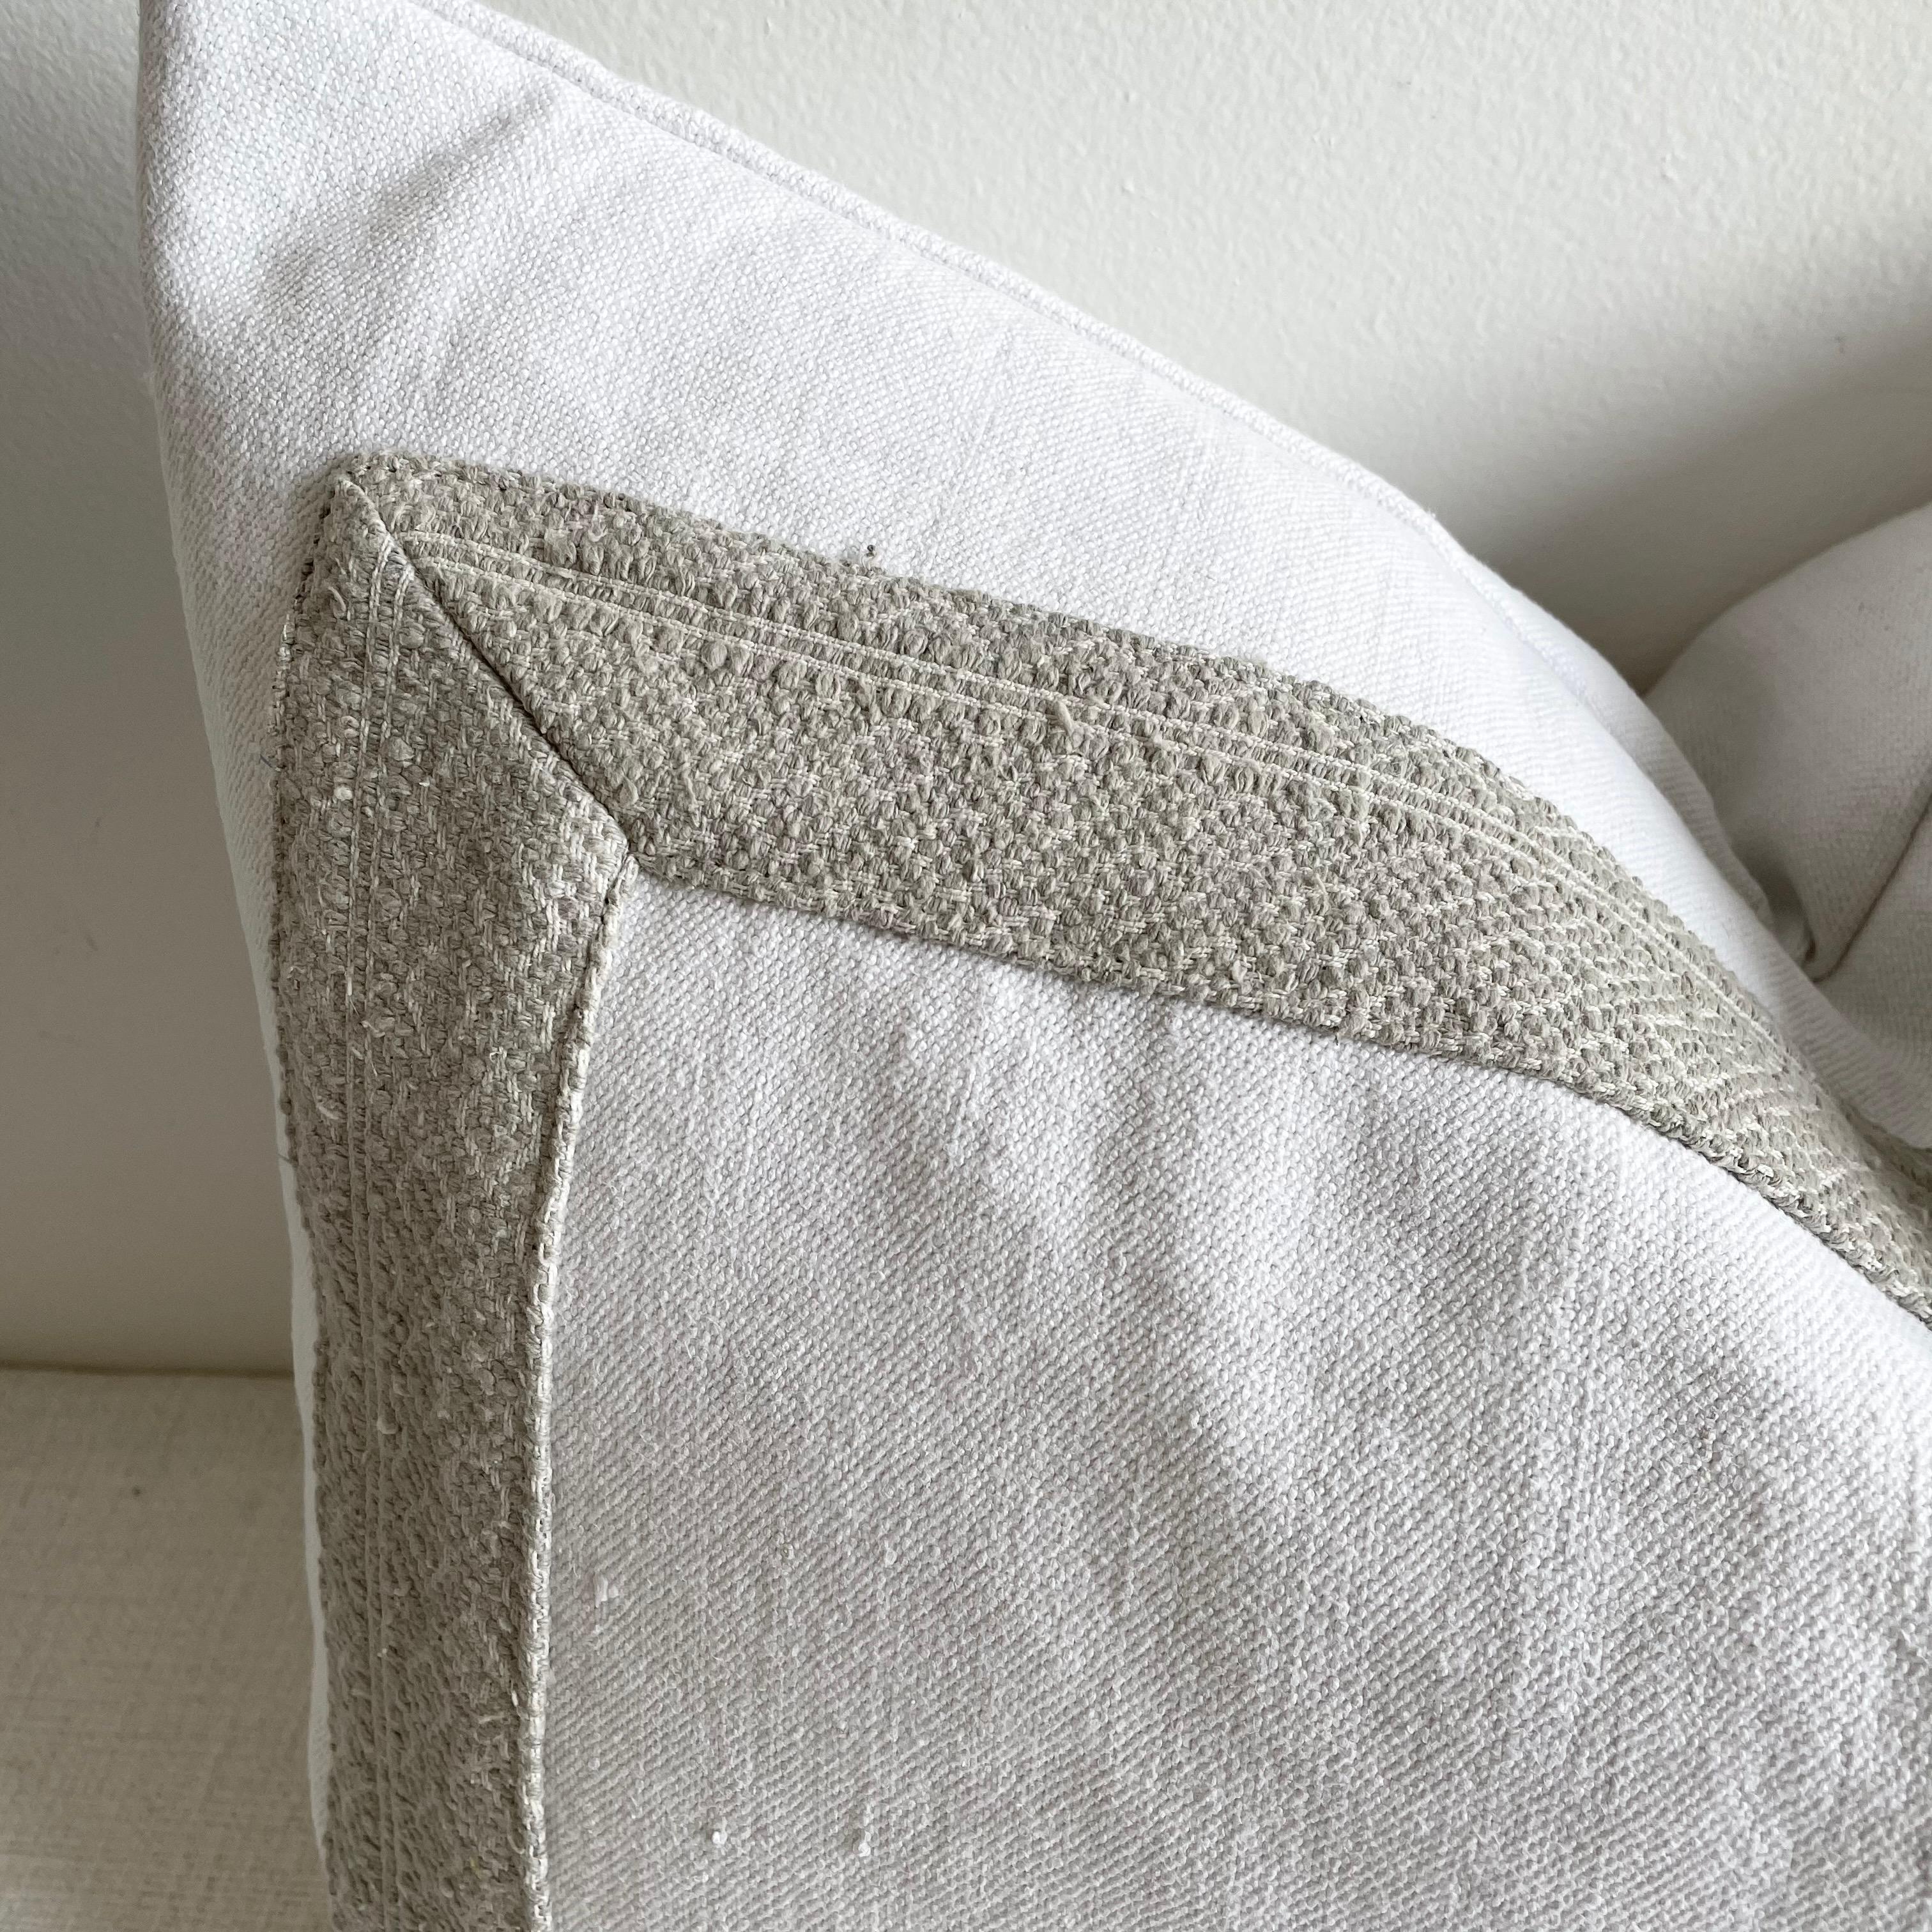 This vintage textile pillow face features a 100 year old linen with gray woven 2